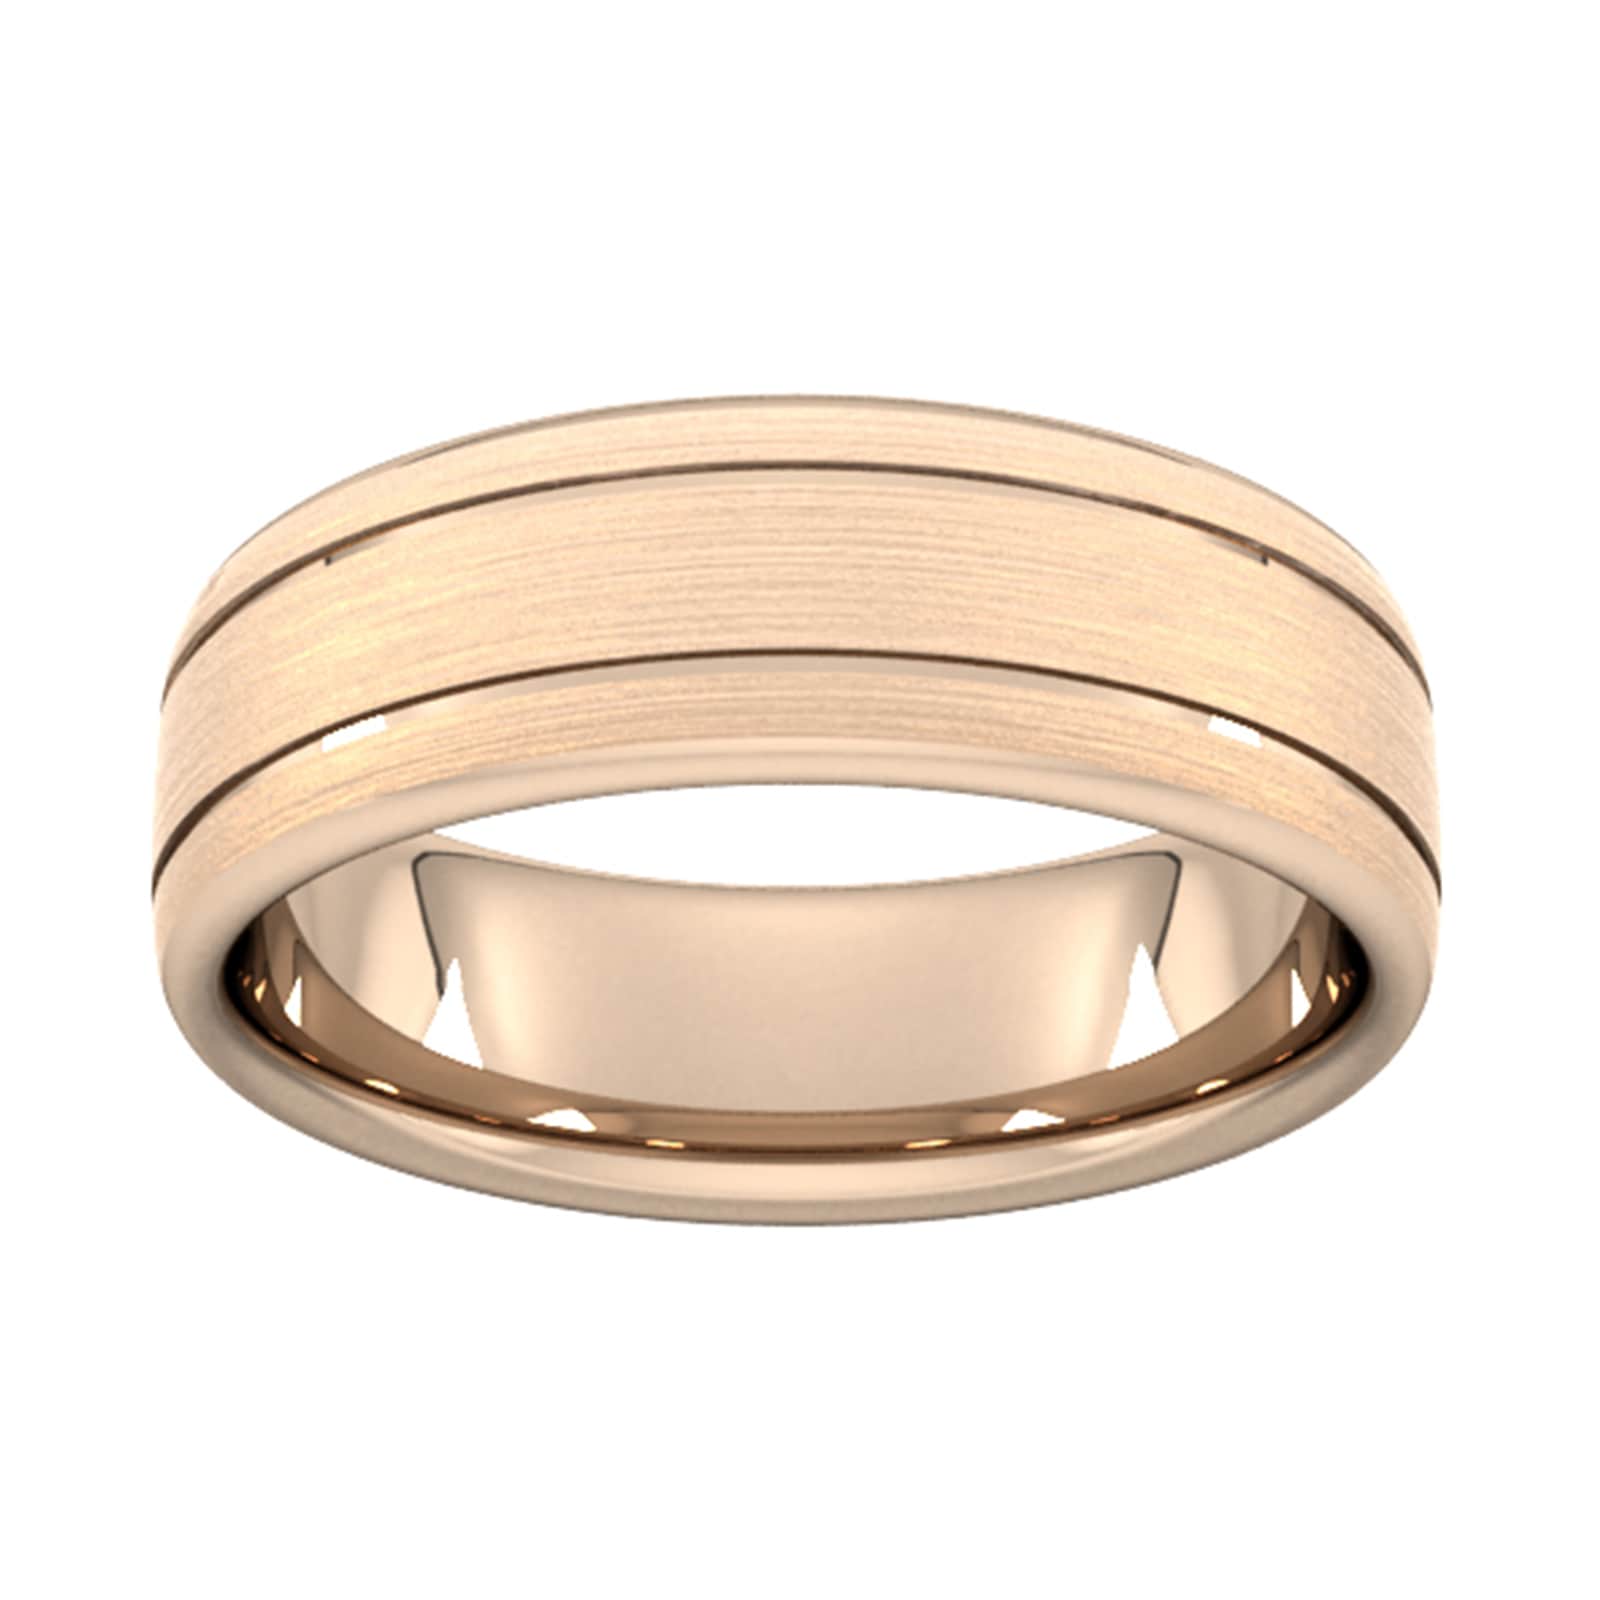 7mm Slight Court Extra Heavy Matt Finish With Double Grooves Wedding Ring In 9 Carat Rose Gold - Ring Size H